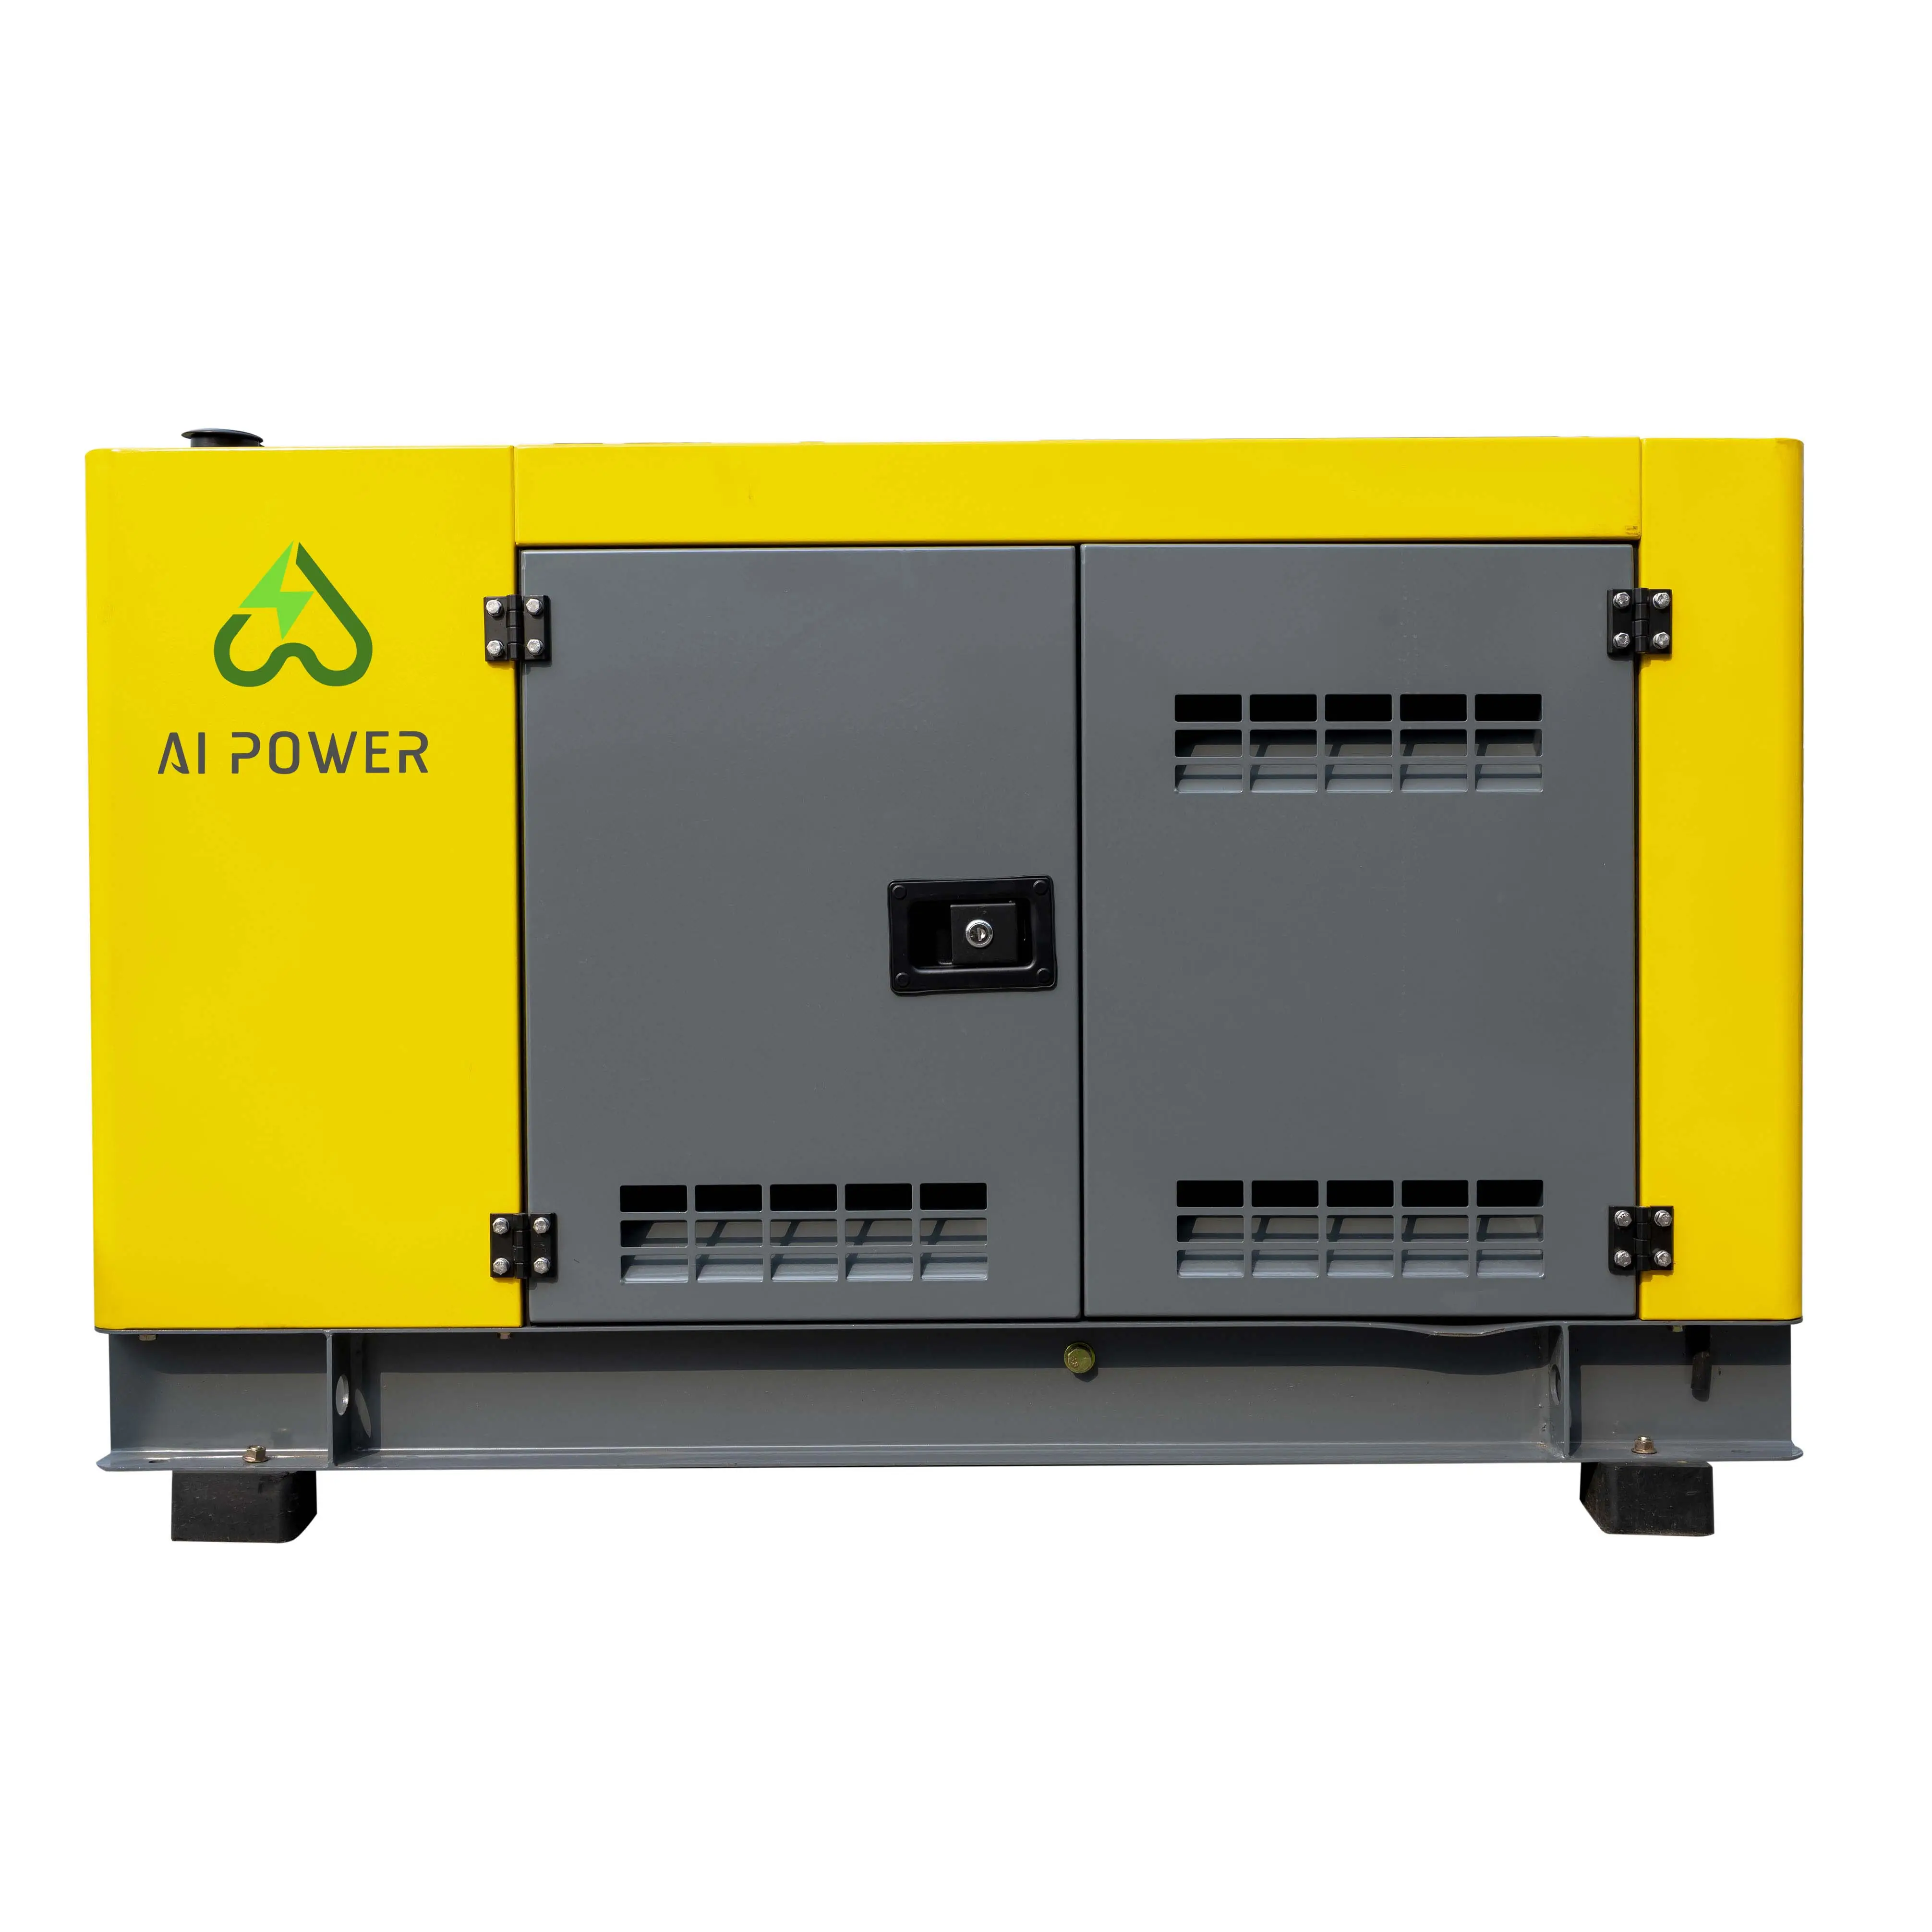 kipor small silent standby diesel generator single phase 10kw diesel generator for home use